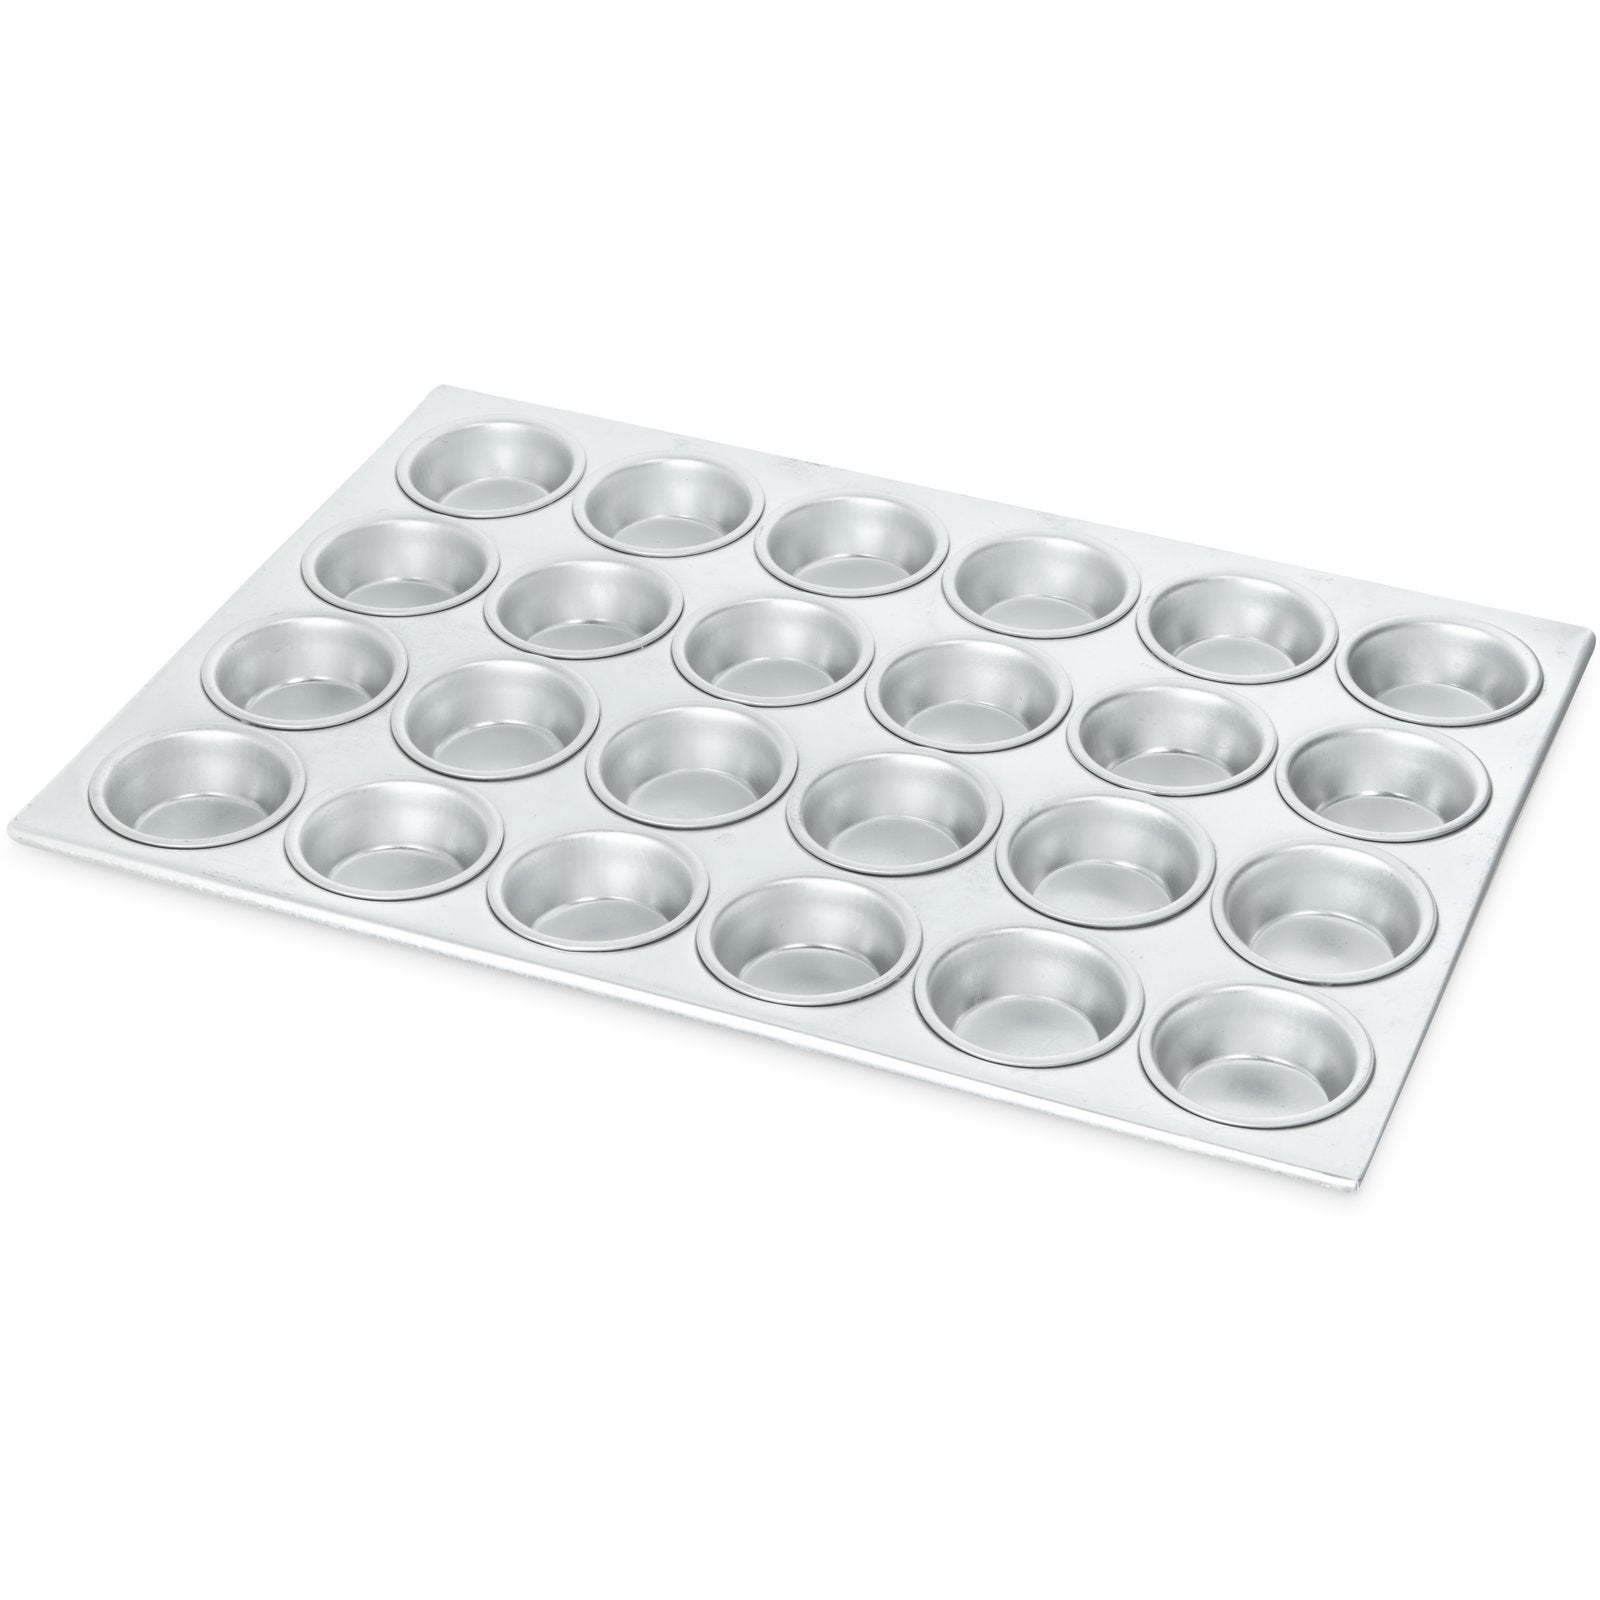 MUFFIN PAN, 24 CUP/3 OZ - Mabrook Hotel Supplies